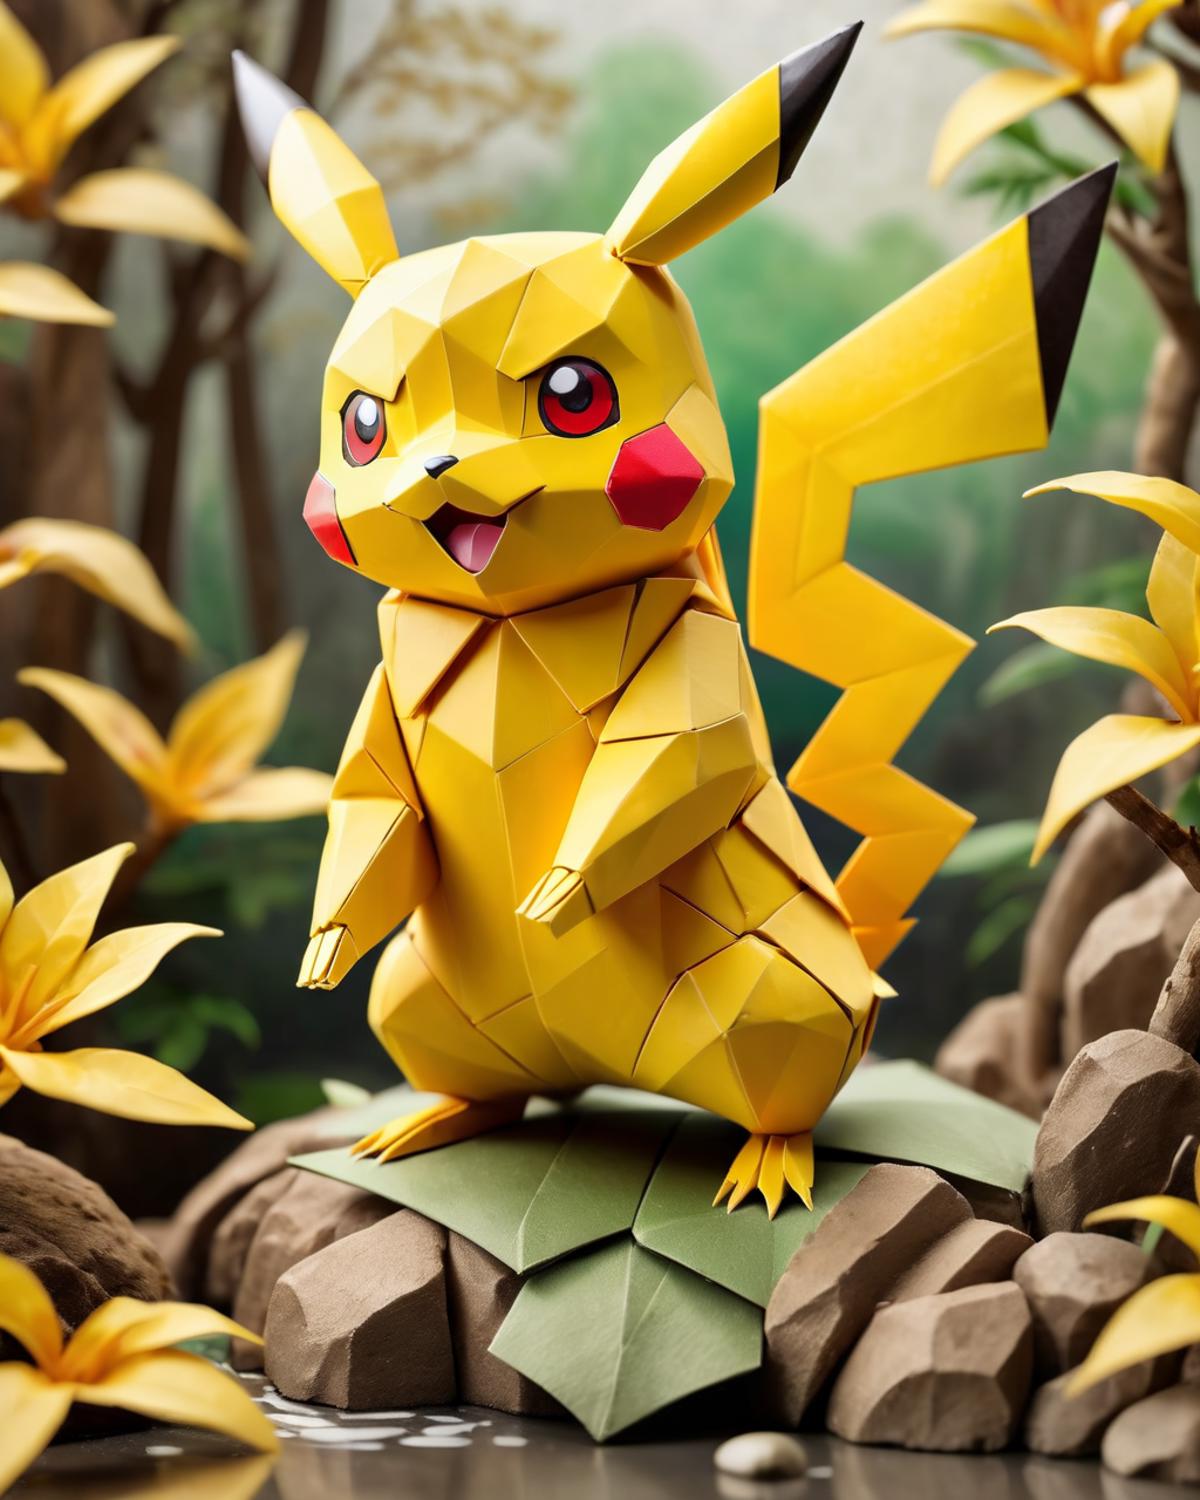 A Paper Pikachu Sitting on a Rock in a Forest